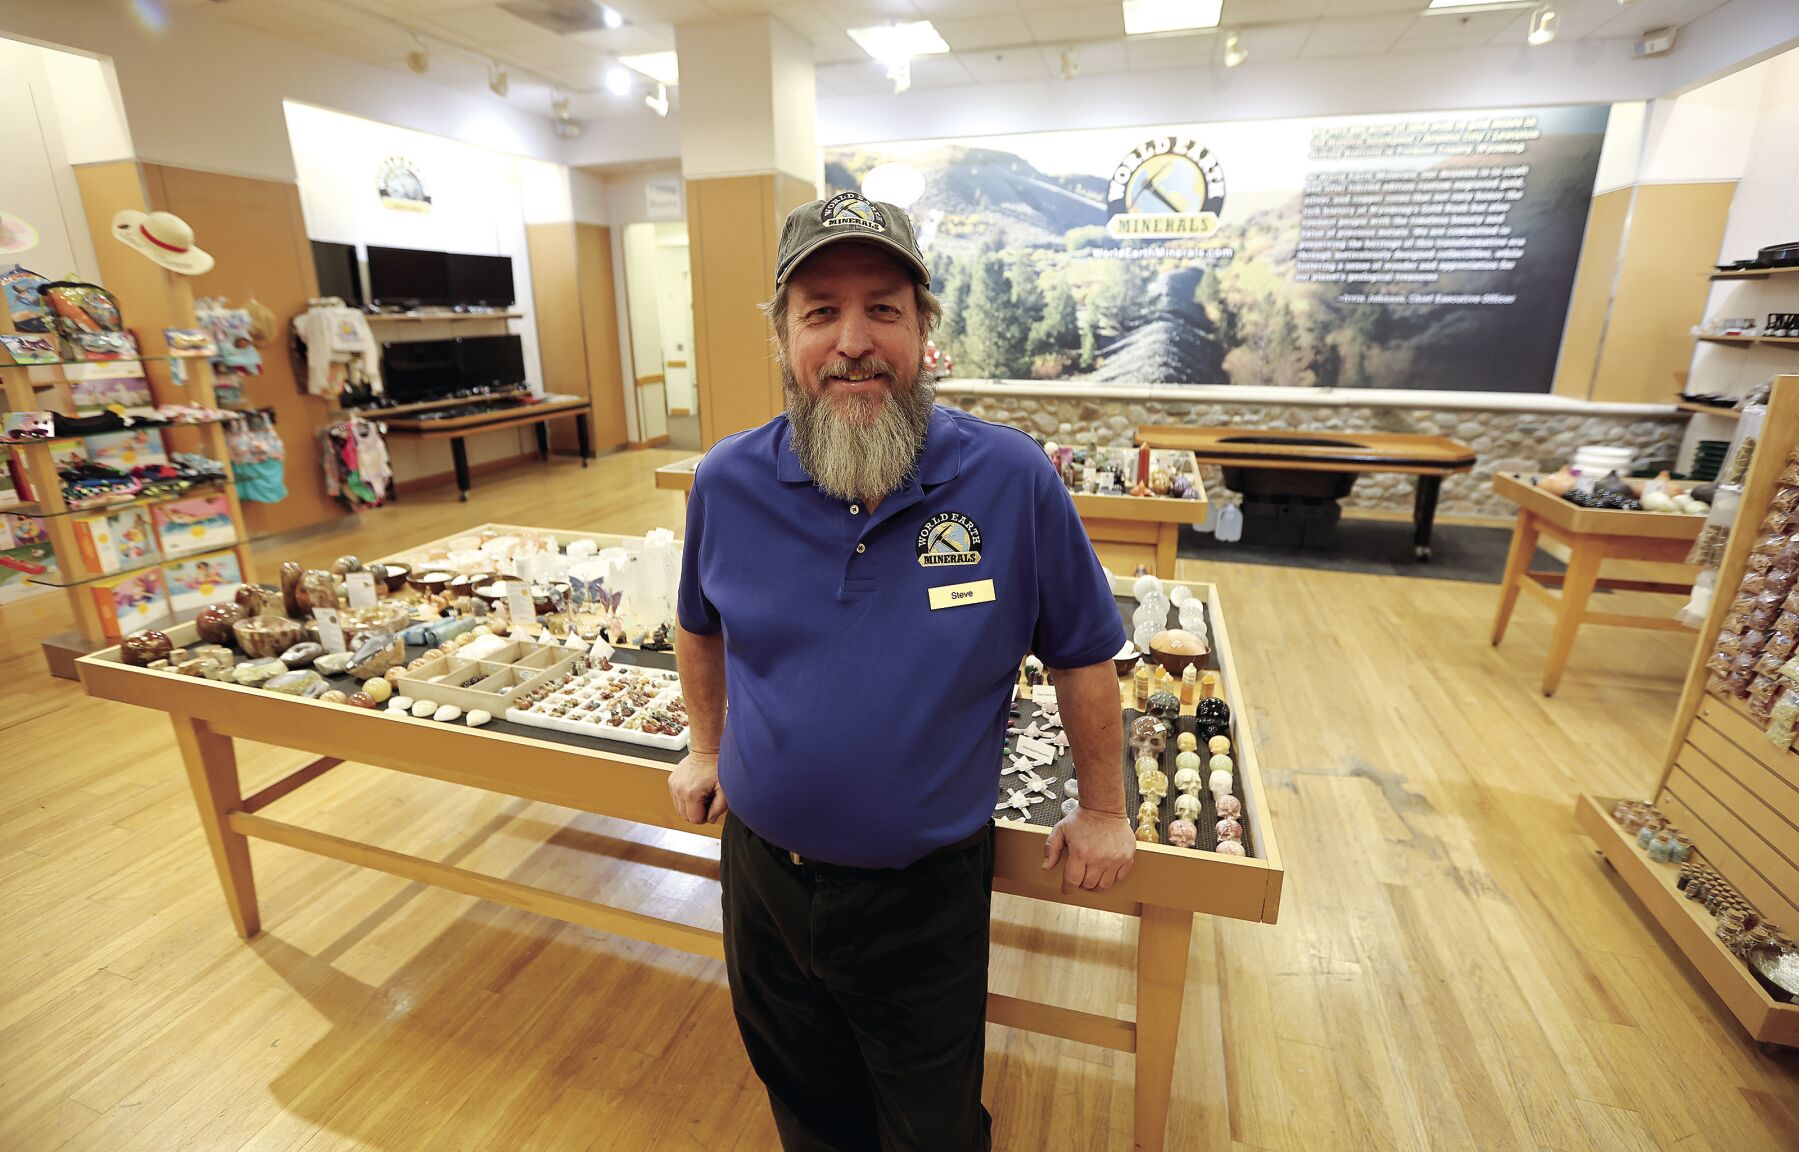 Steve Mueller is the general manager of World Earth Minerals and its attached storefront, This & That, which are now open at Kennedy Mall in Dubuque.    PHOTO CREDIT: Dave Kettering